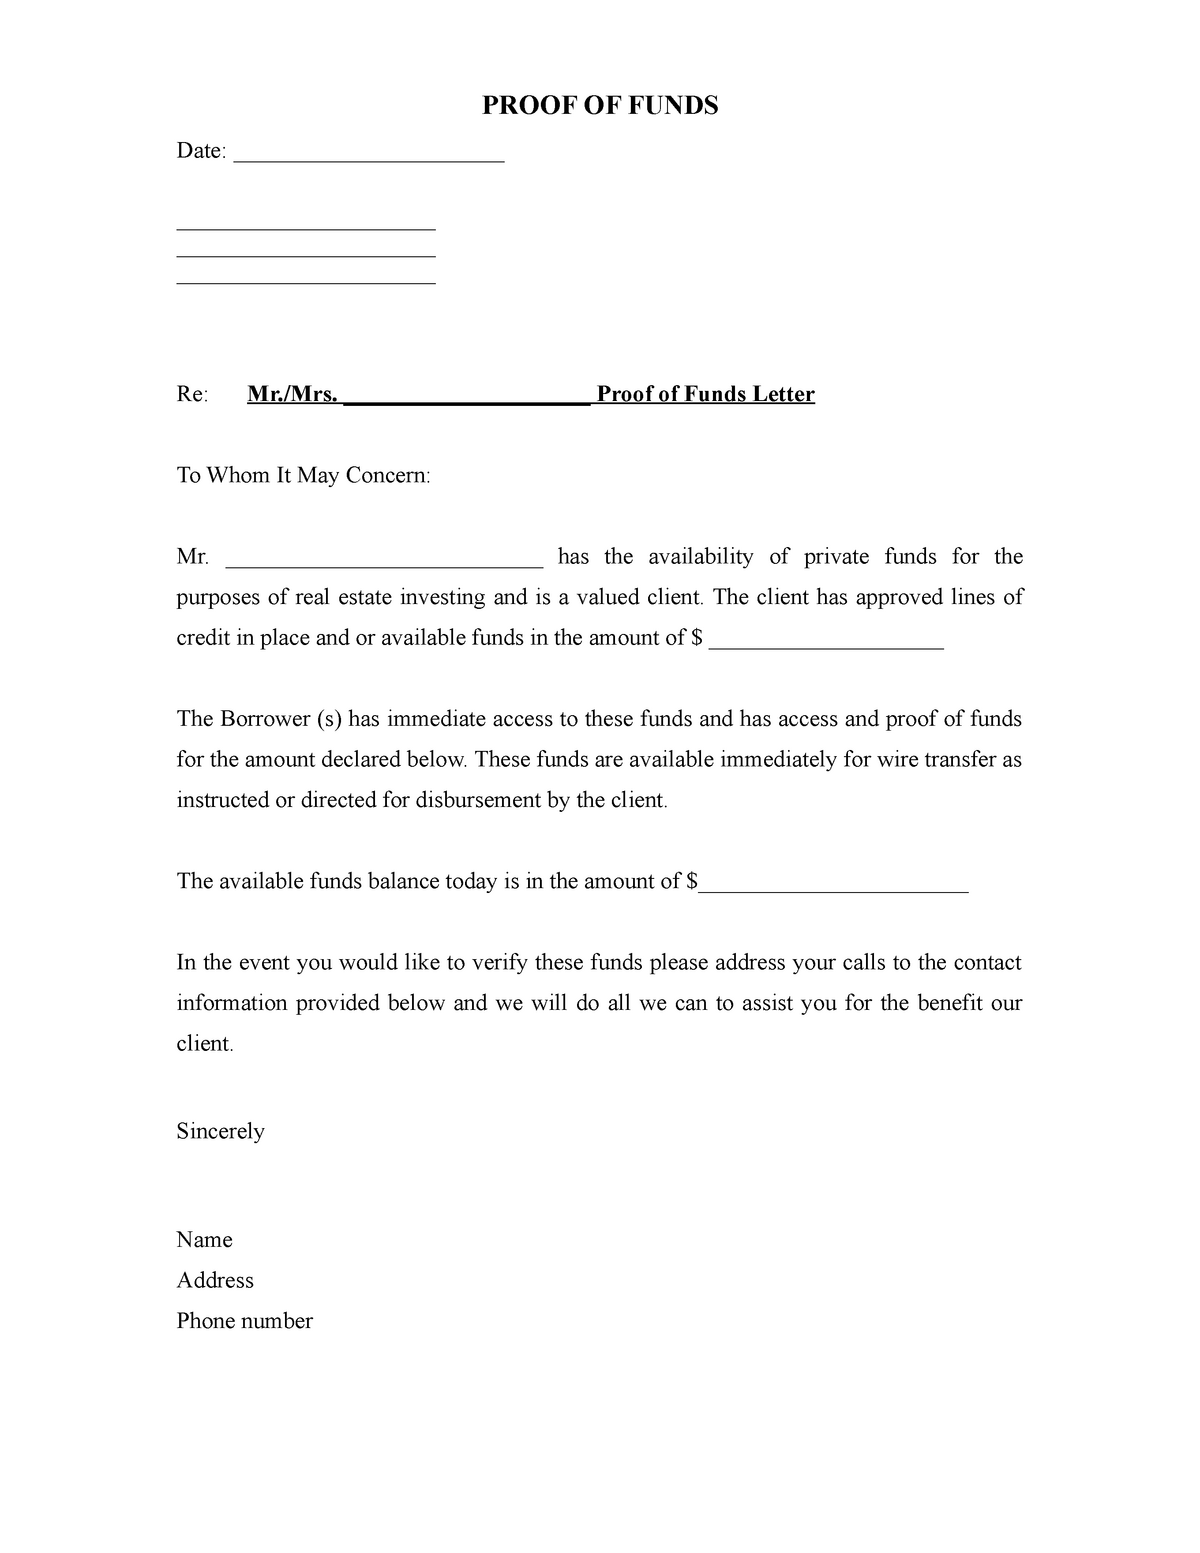 practice: Proof of funds letter template 23 - PROOF OF FUNDS Date Throughout Proof Of Funds Letter Template